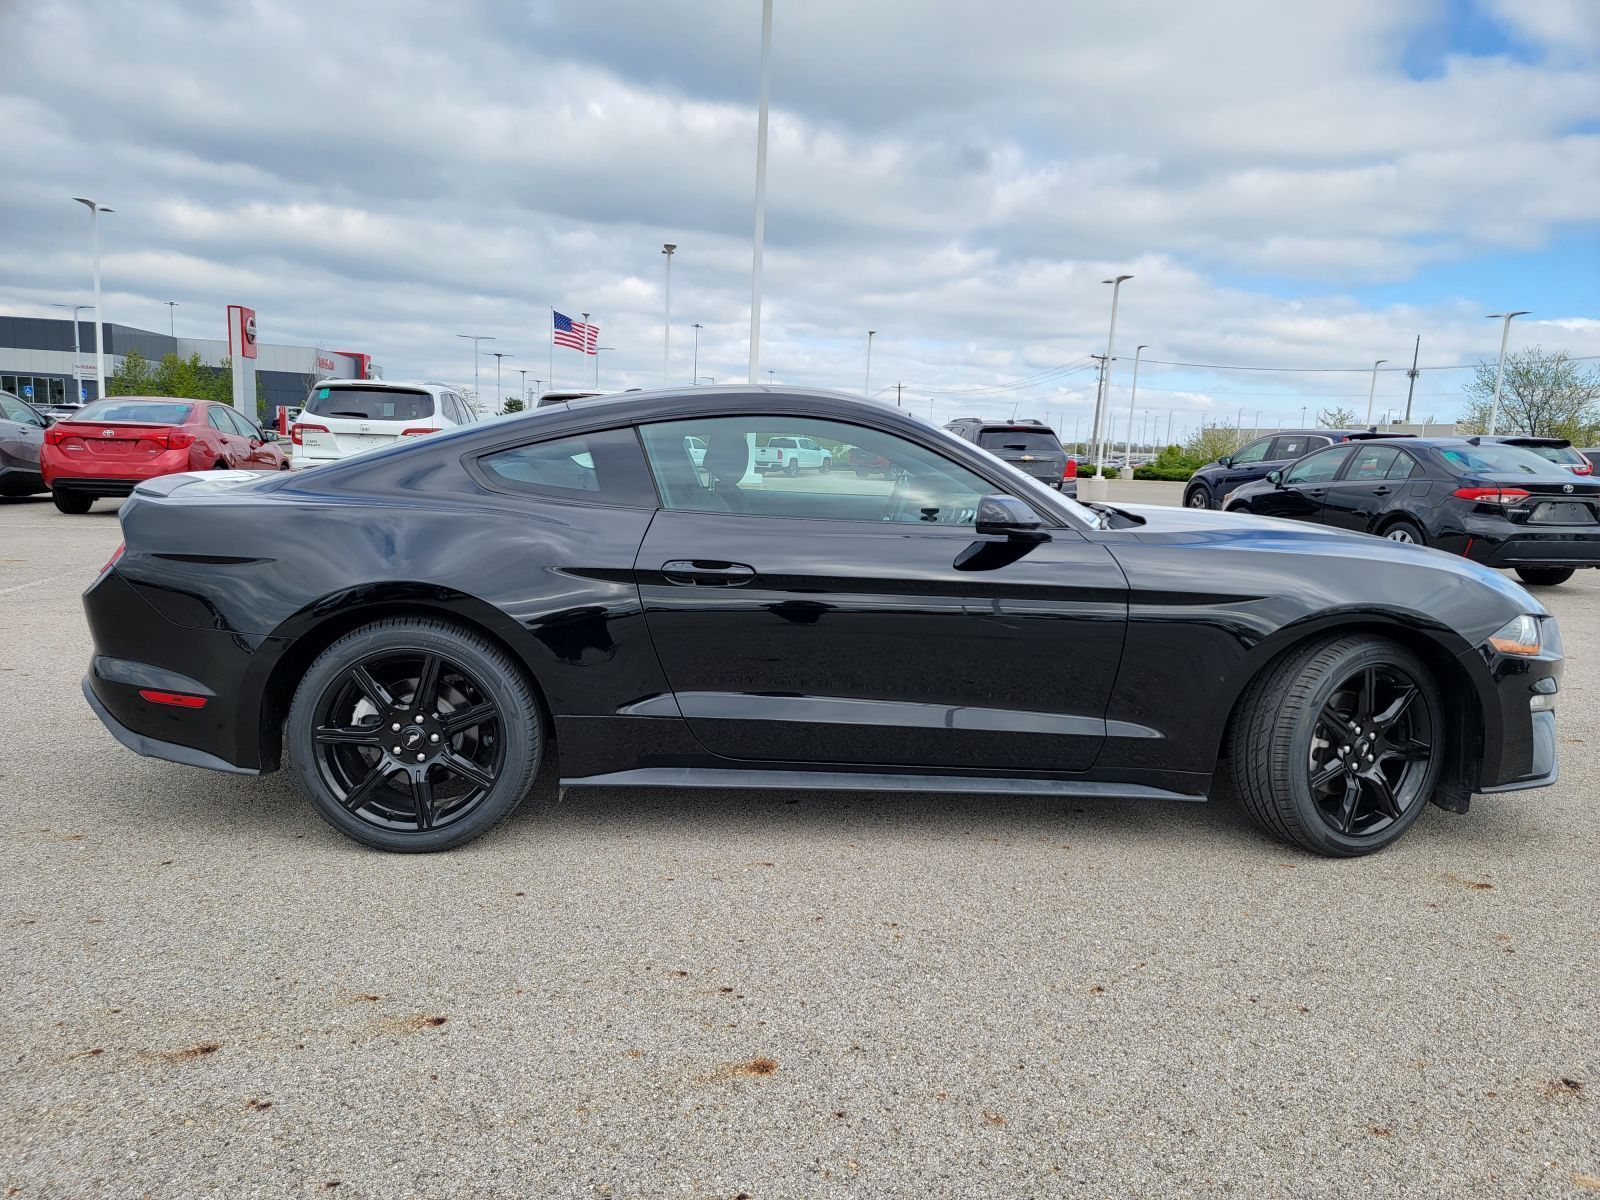 Used, 2019 Ford Mustang EcoBoost, Black, P0537-11